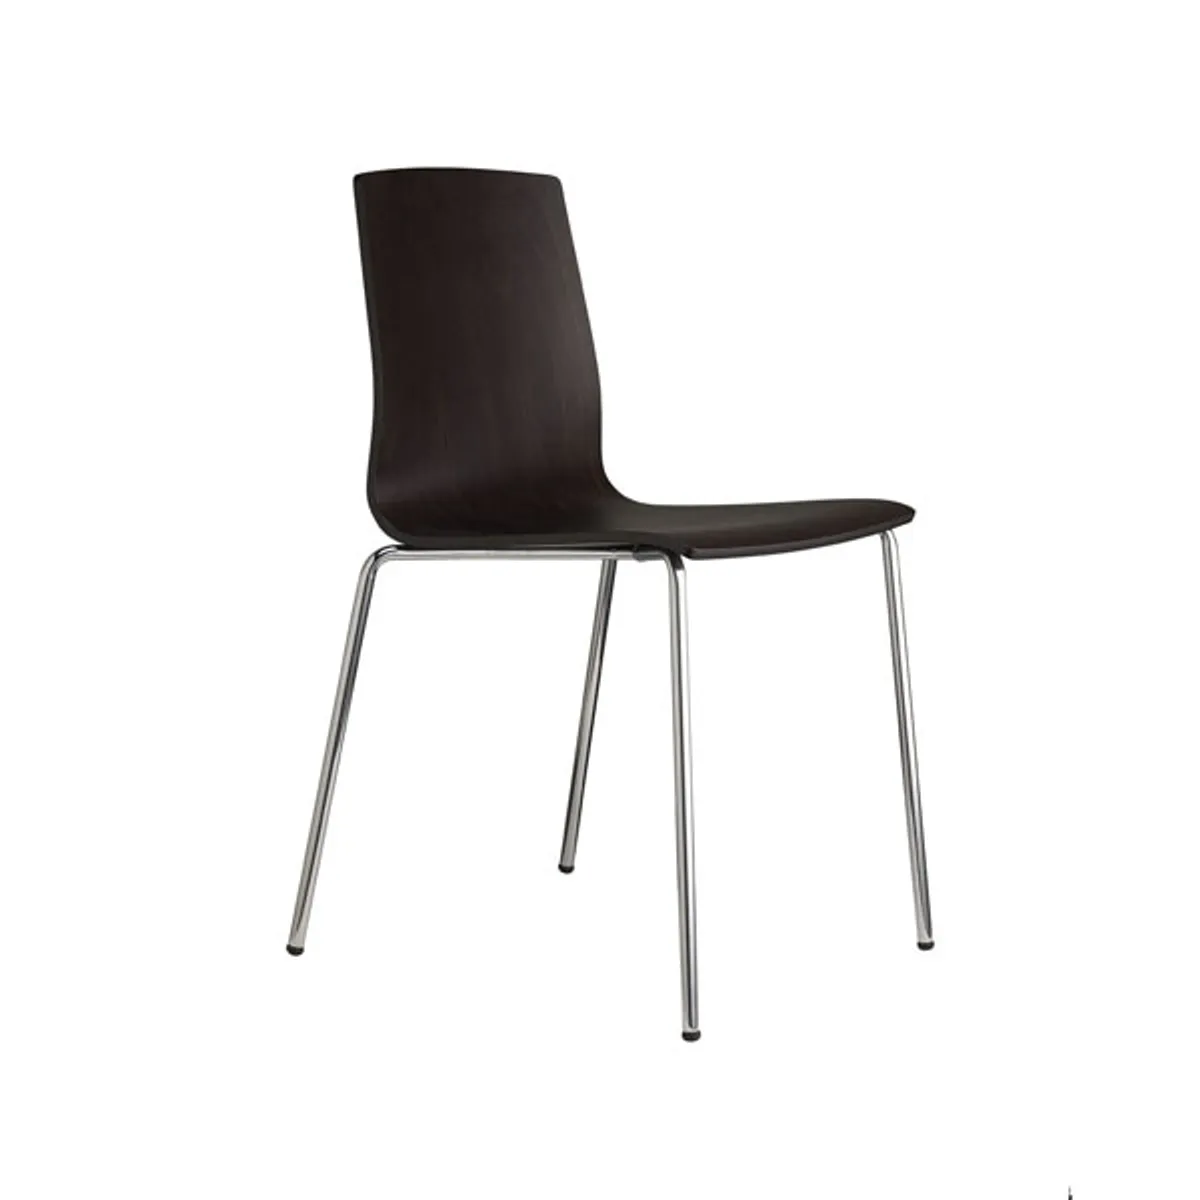 Evie 2 metal side chair 5 Inside Out Contracts